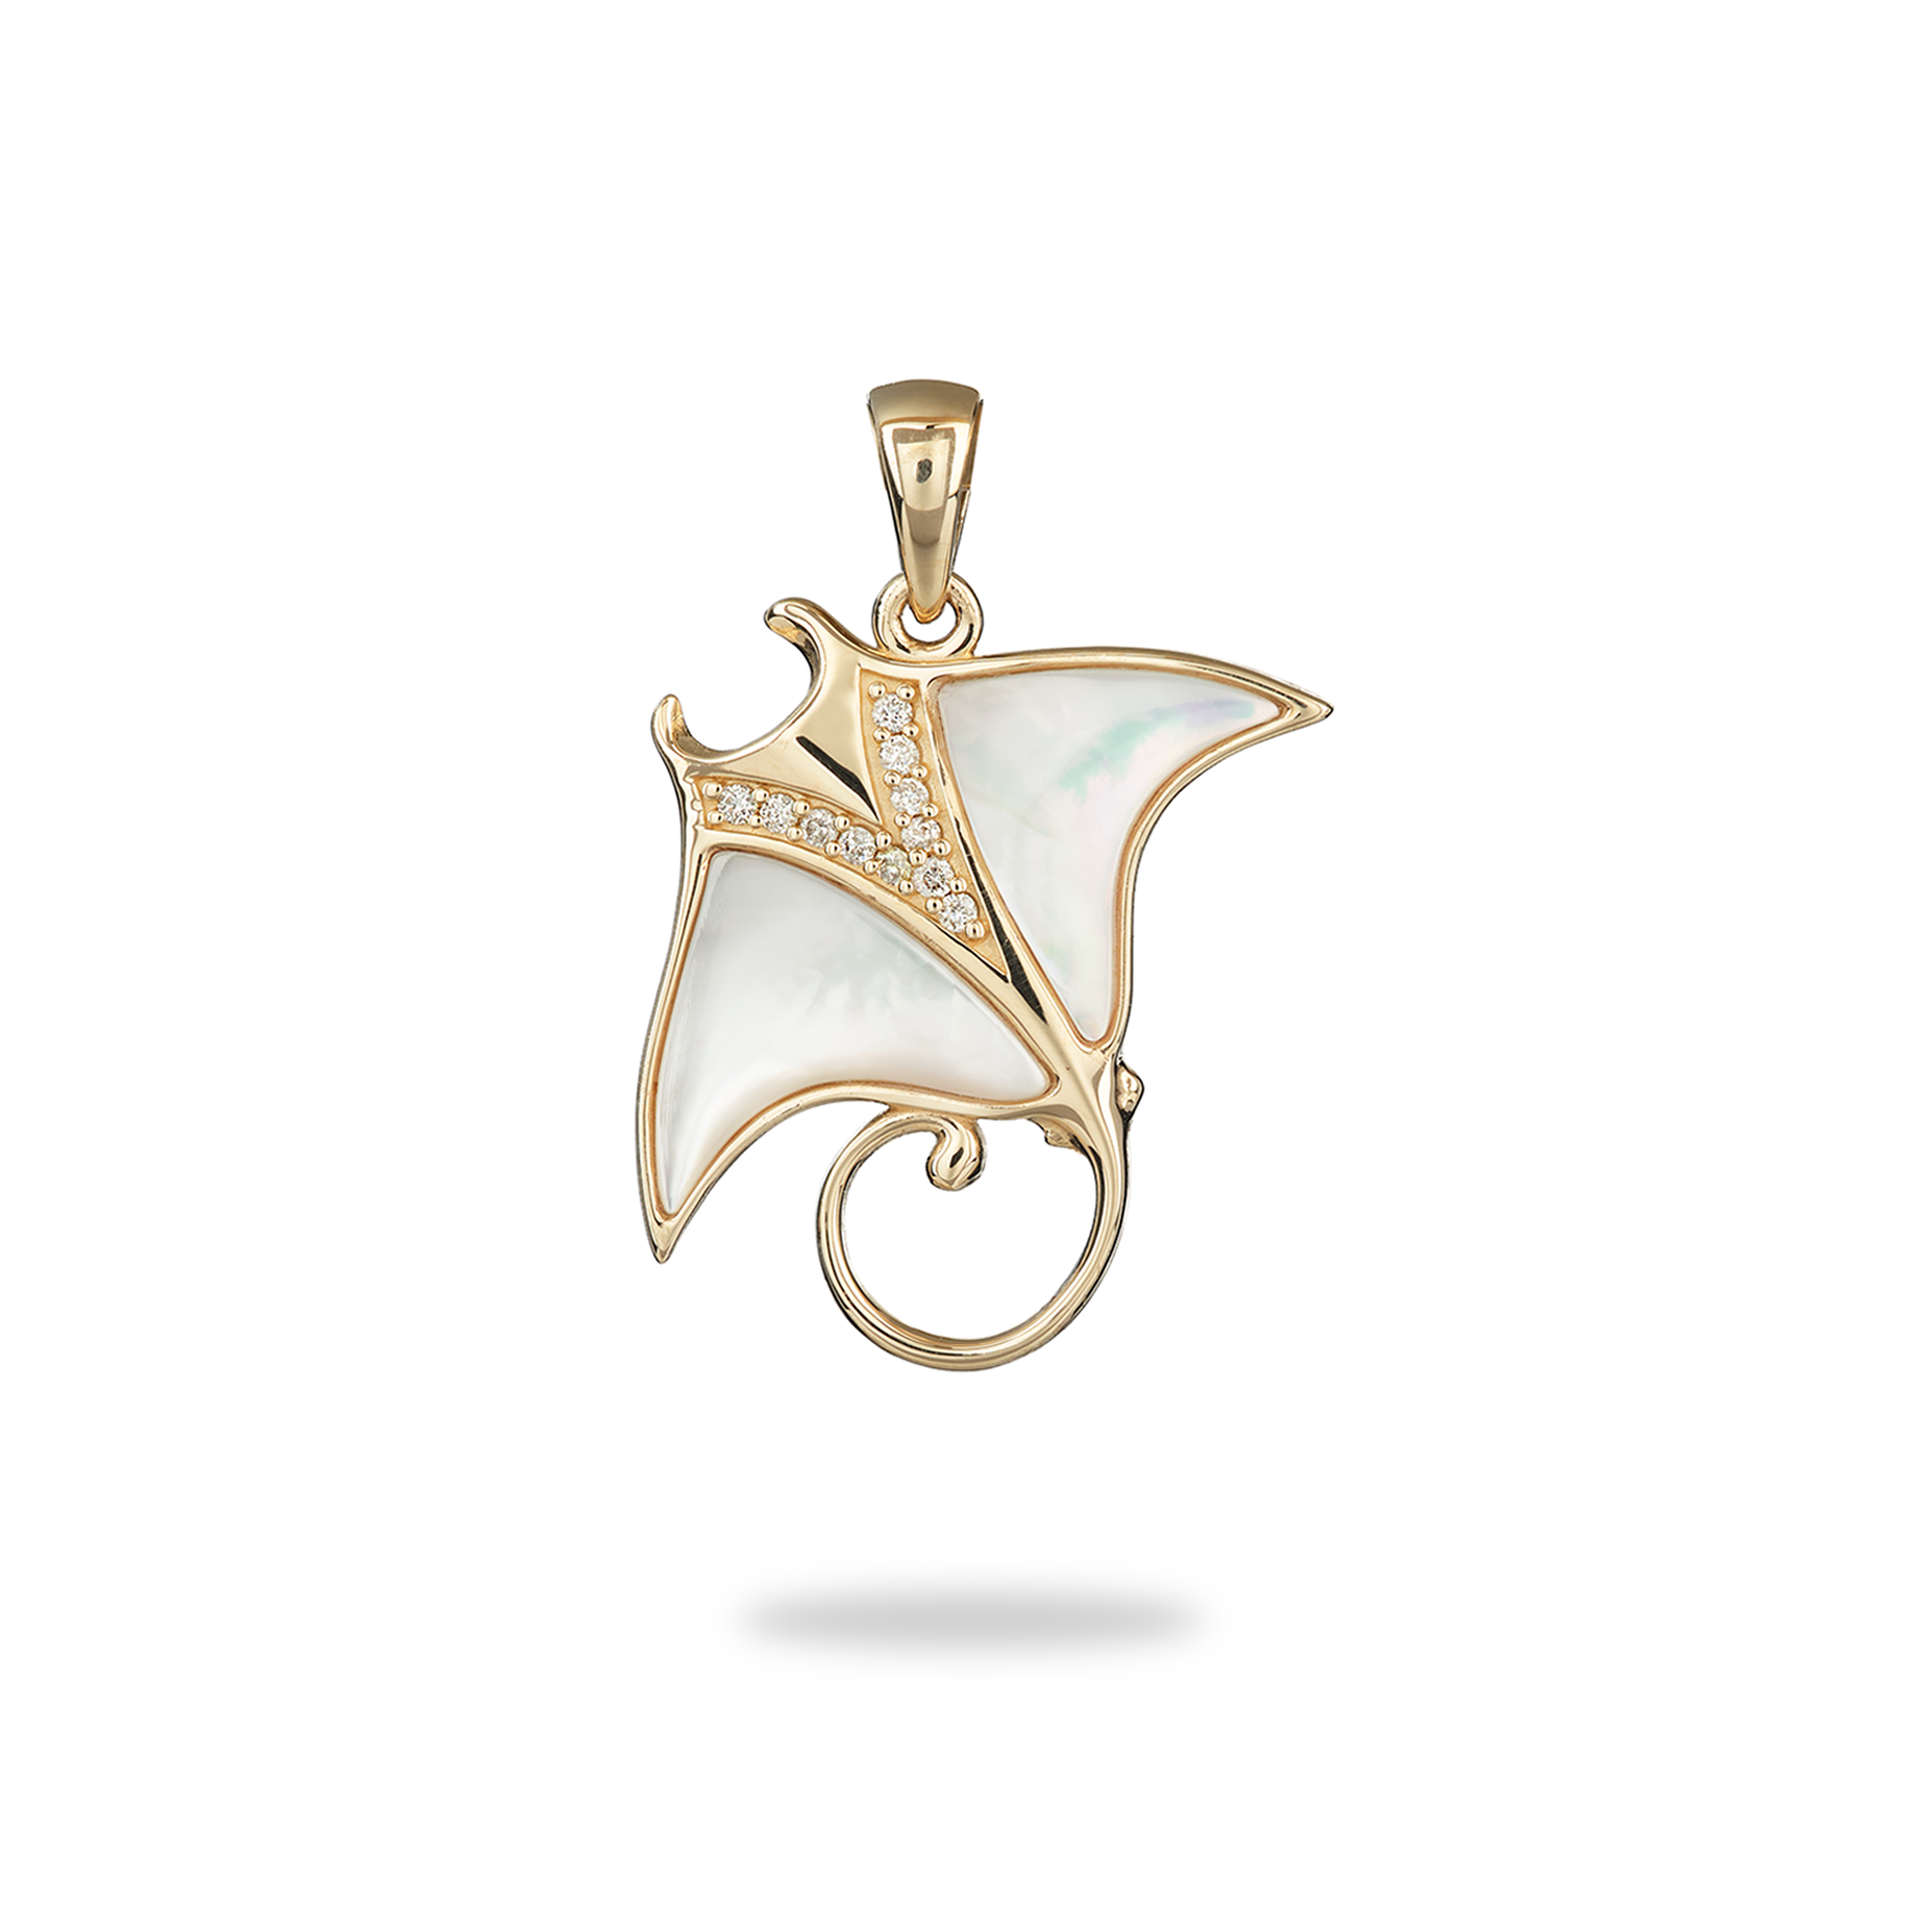 Manta Ray Mother of Pearl Pendant in Gold with Diamonds - 21mm- Made in Hawaii